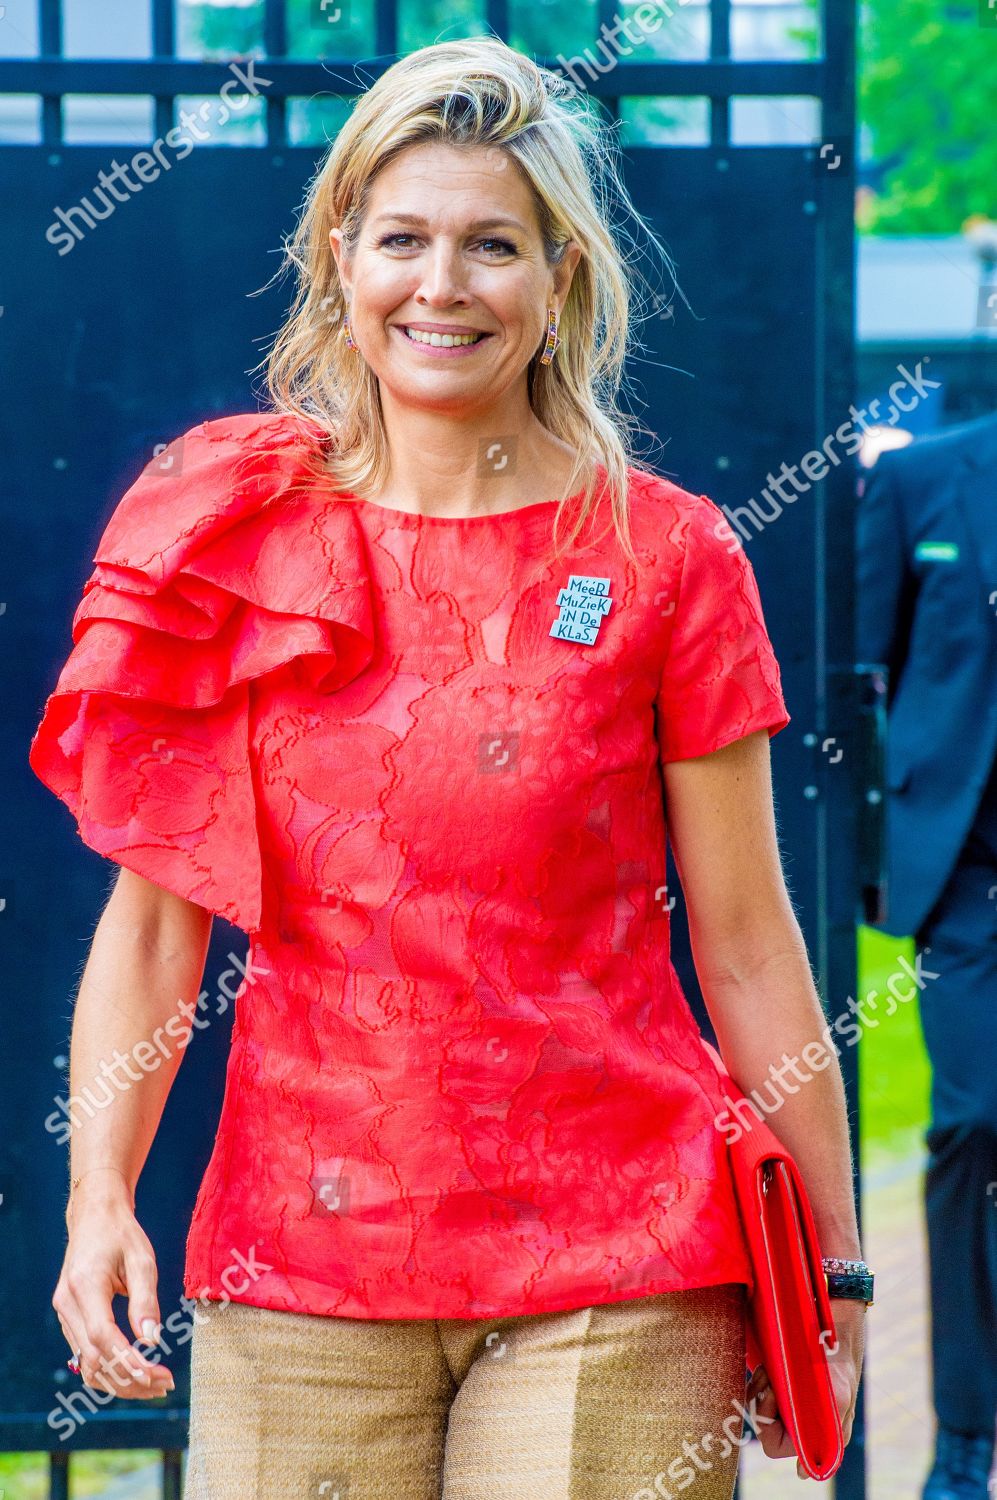 queen-maxima-signing-the-more-music-covenant-in-the-classroom-drenthe-the-netherlands-shutterstock-editorial-10317631ak.jpg